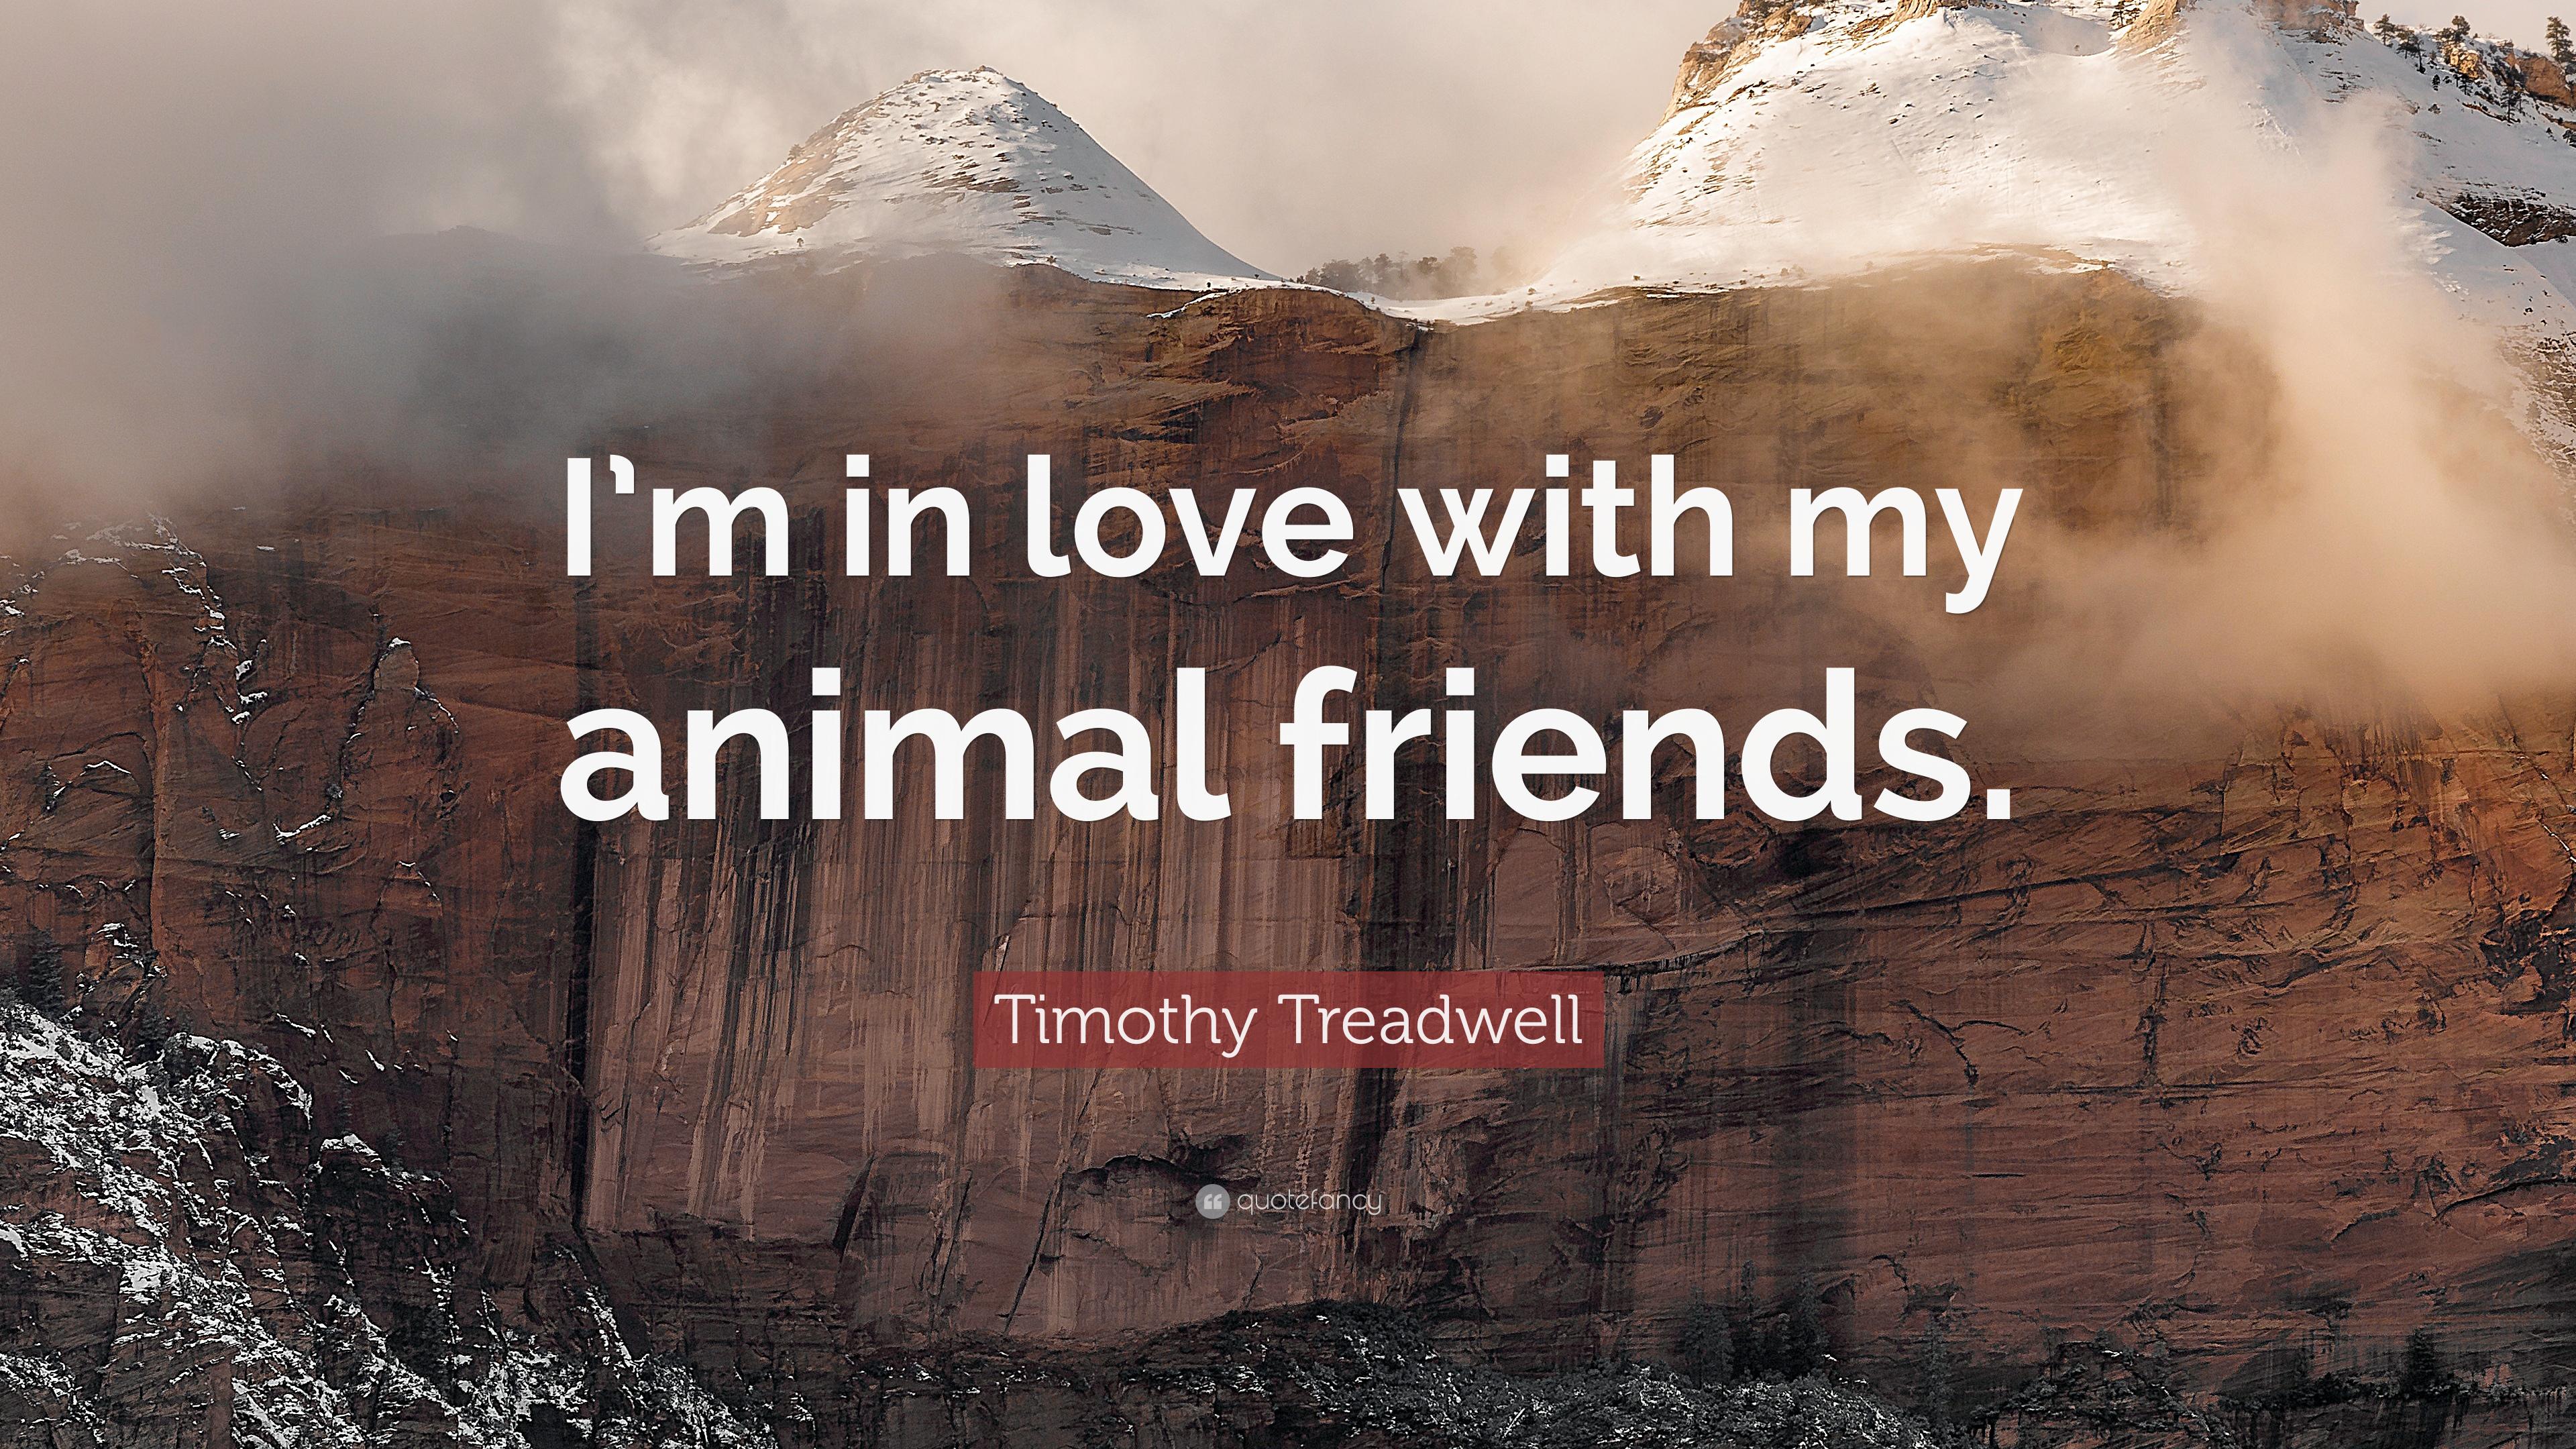 Timothy Treadwell Quote: “I'm in love with my animal friends.” 7